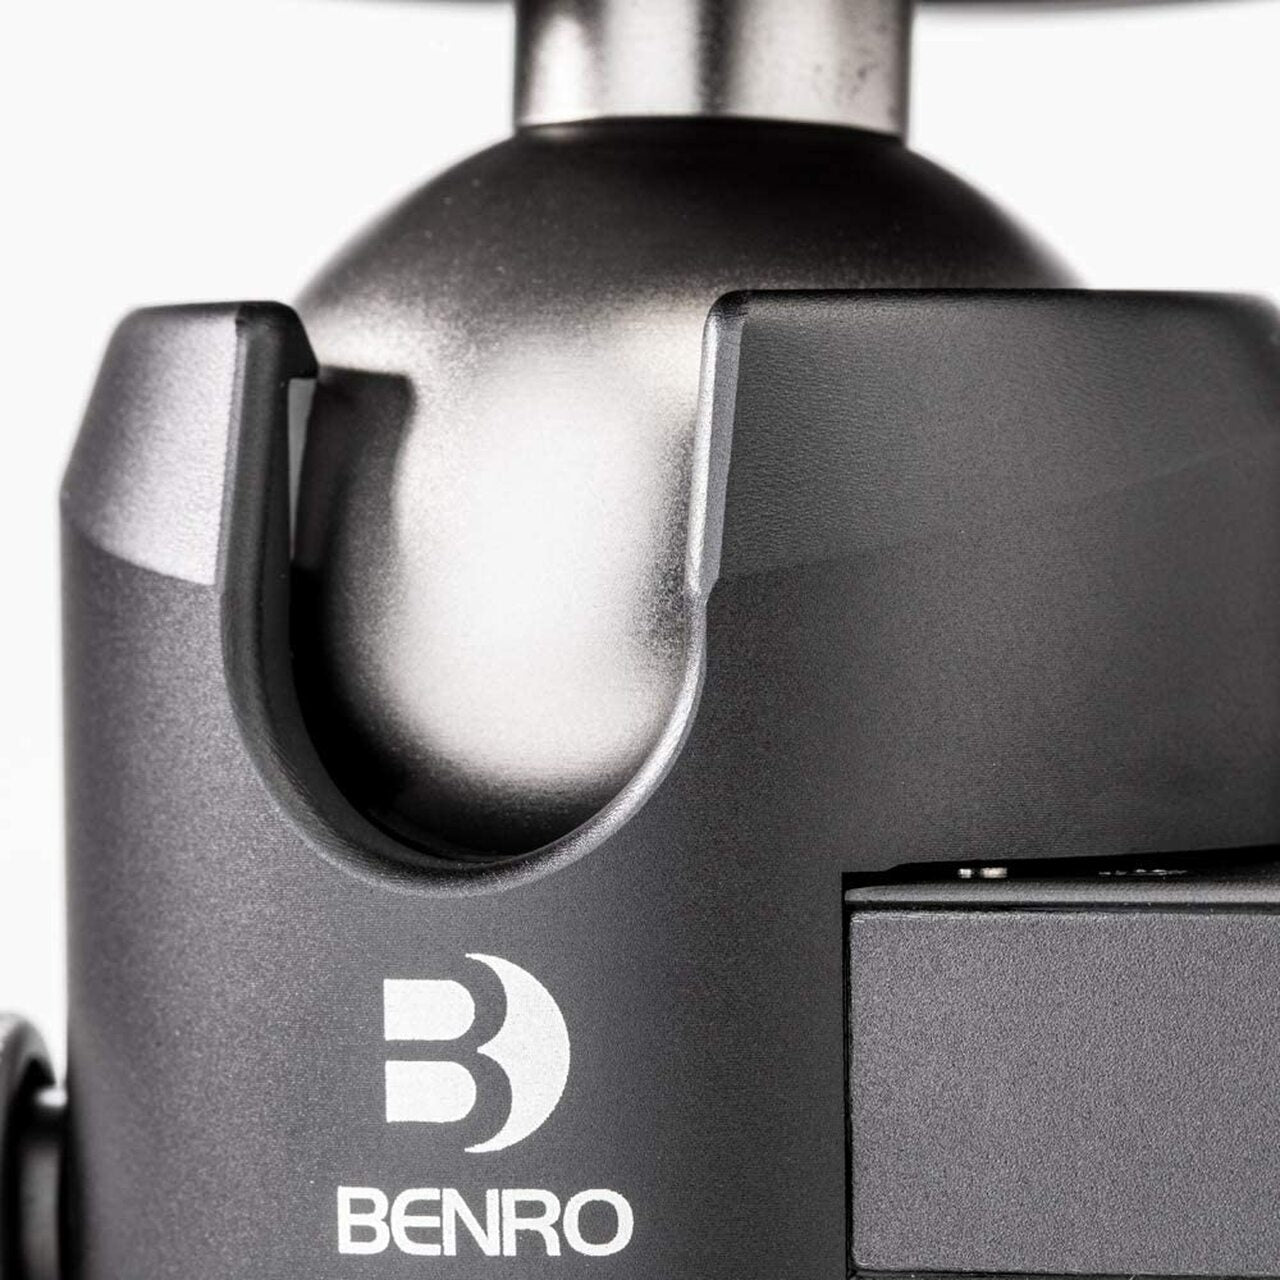 Benro GX35 Two Series Low Profile Aluminum Ball Head with Arca-Type Quick Release Plate and 35kg Load Capacity for Camera Tripod